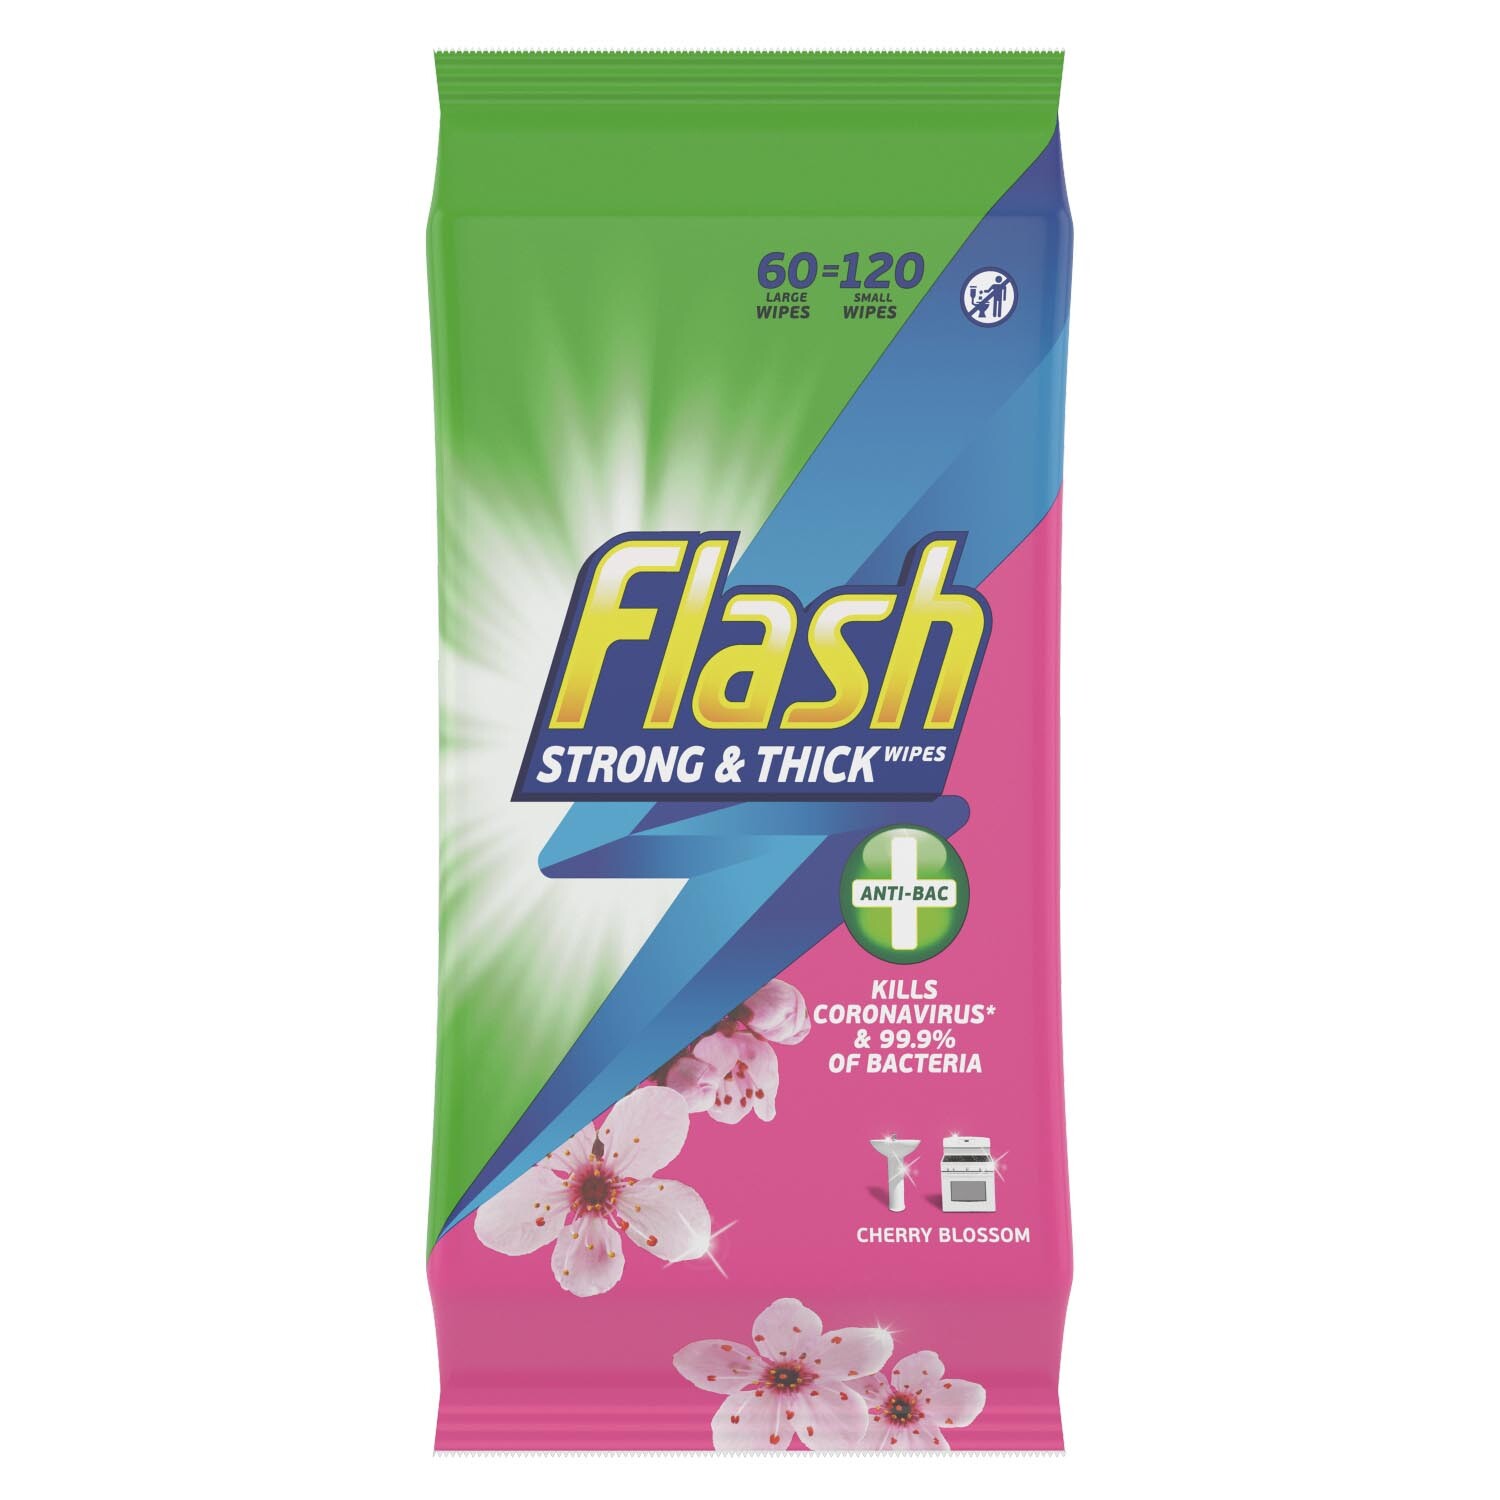 Anti-Bacterial Flash Cherry Blossom Wipes Image